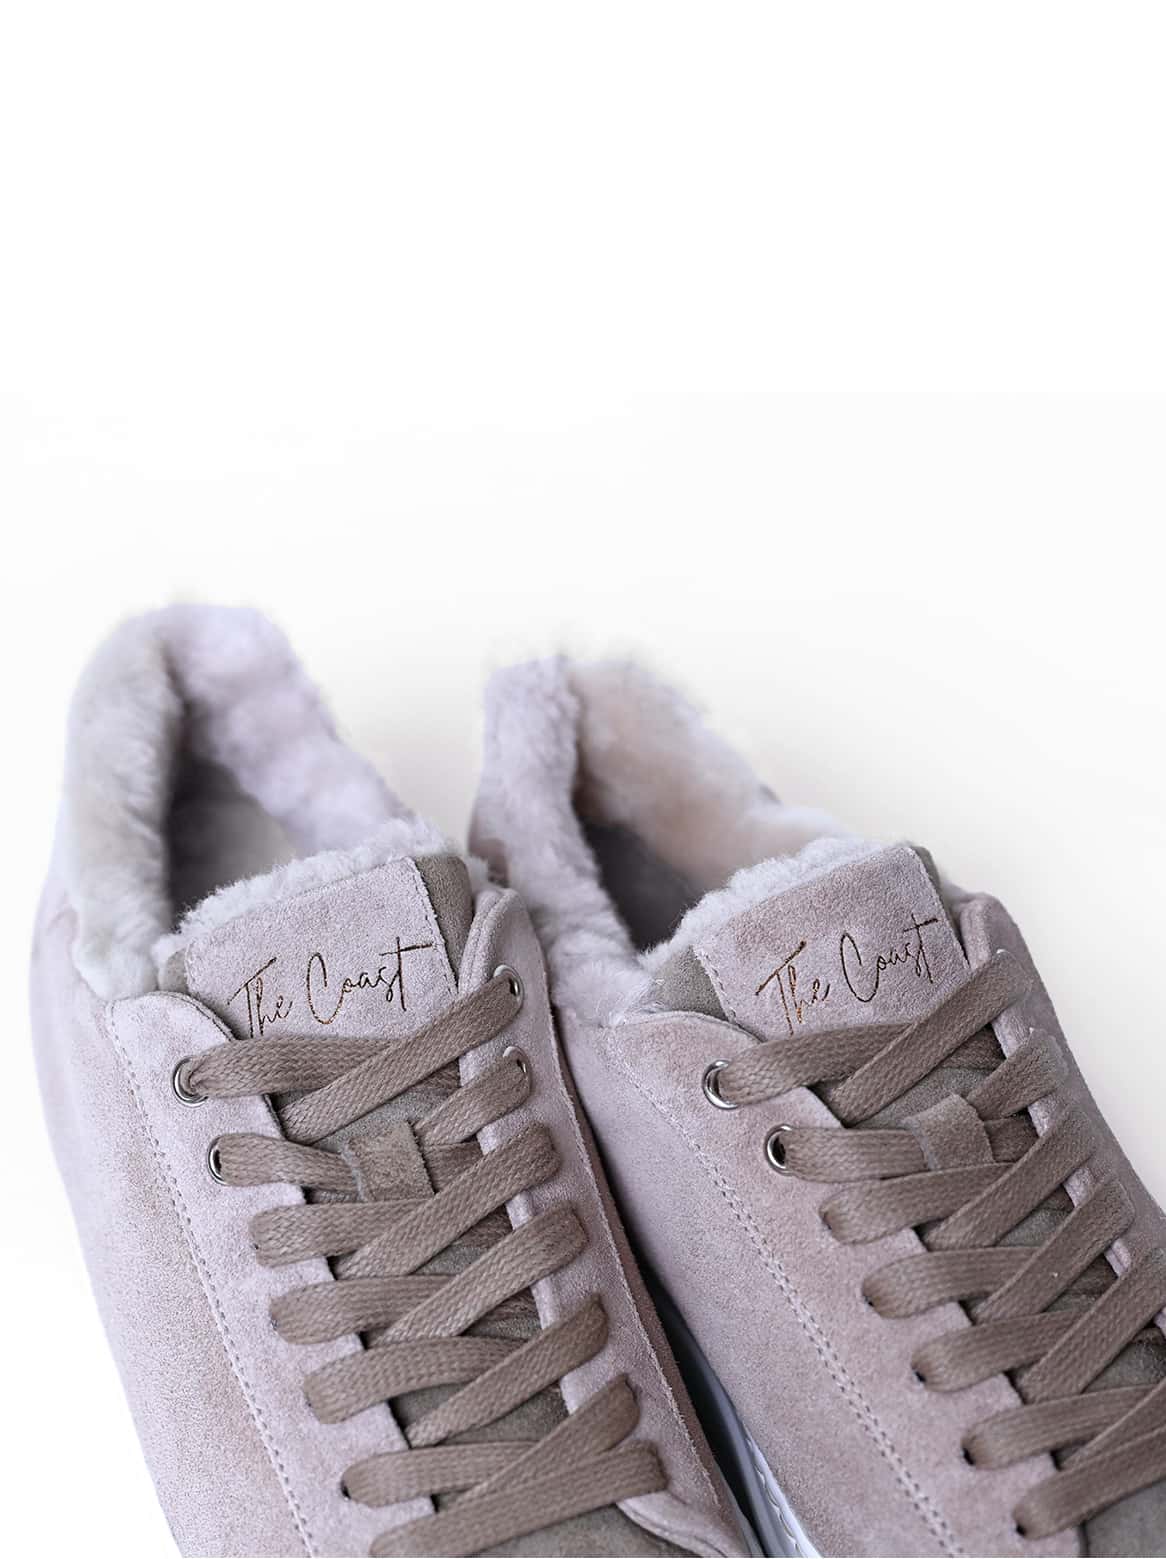 Winter Sneaker Taupe